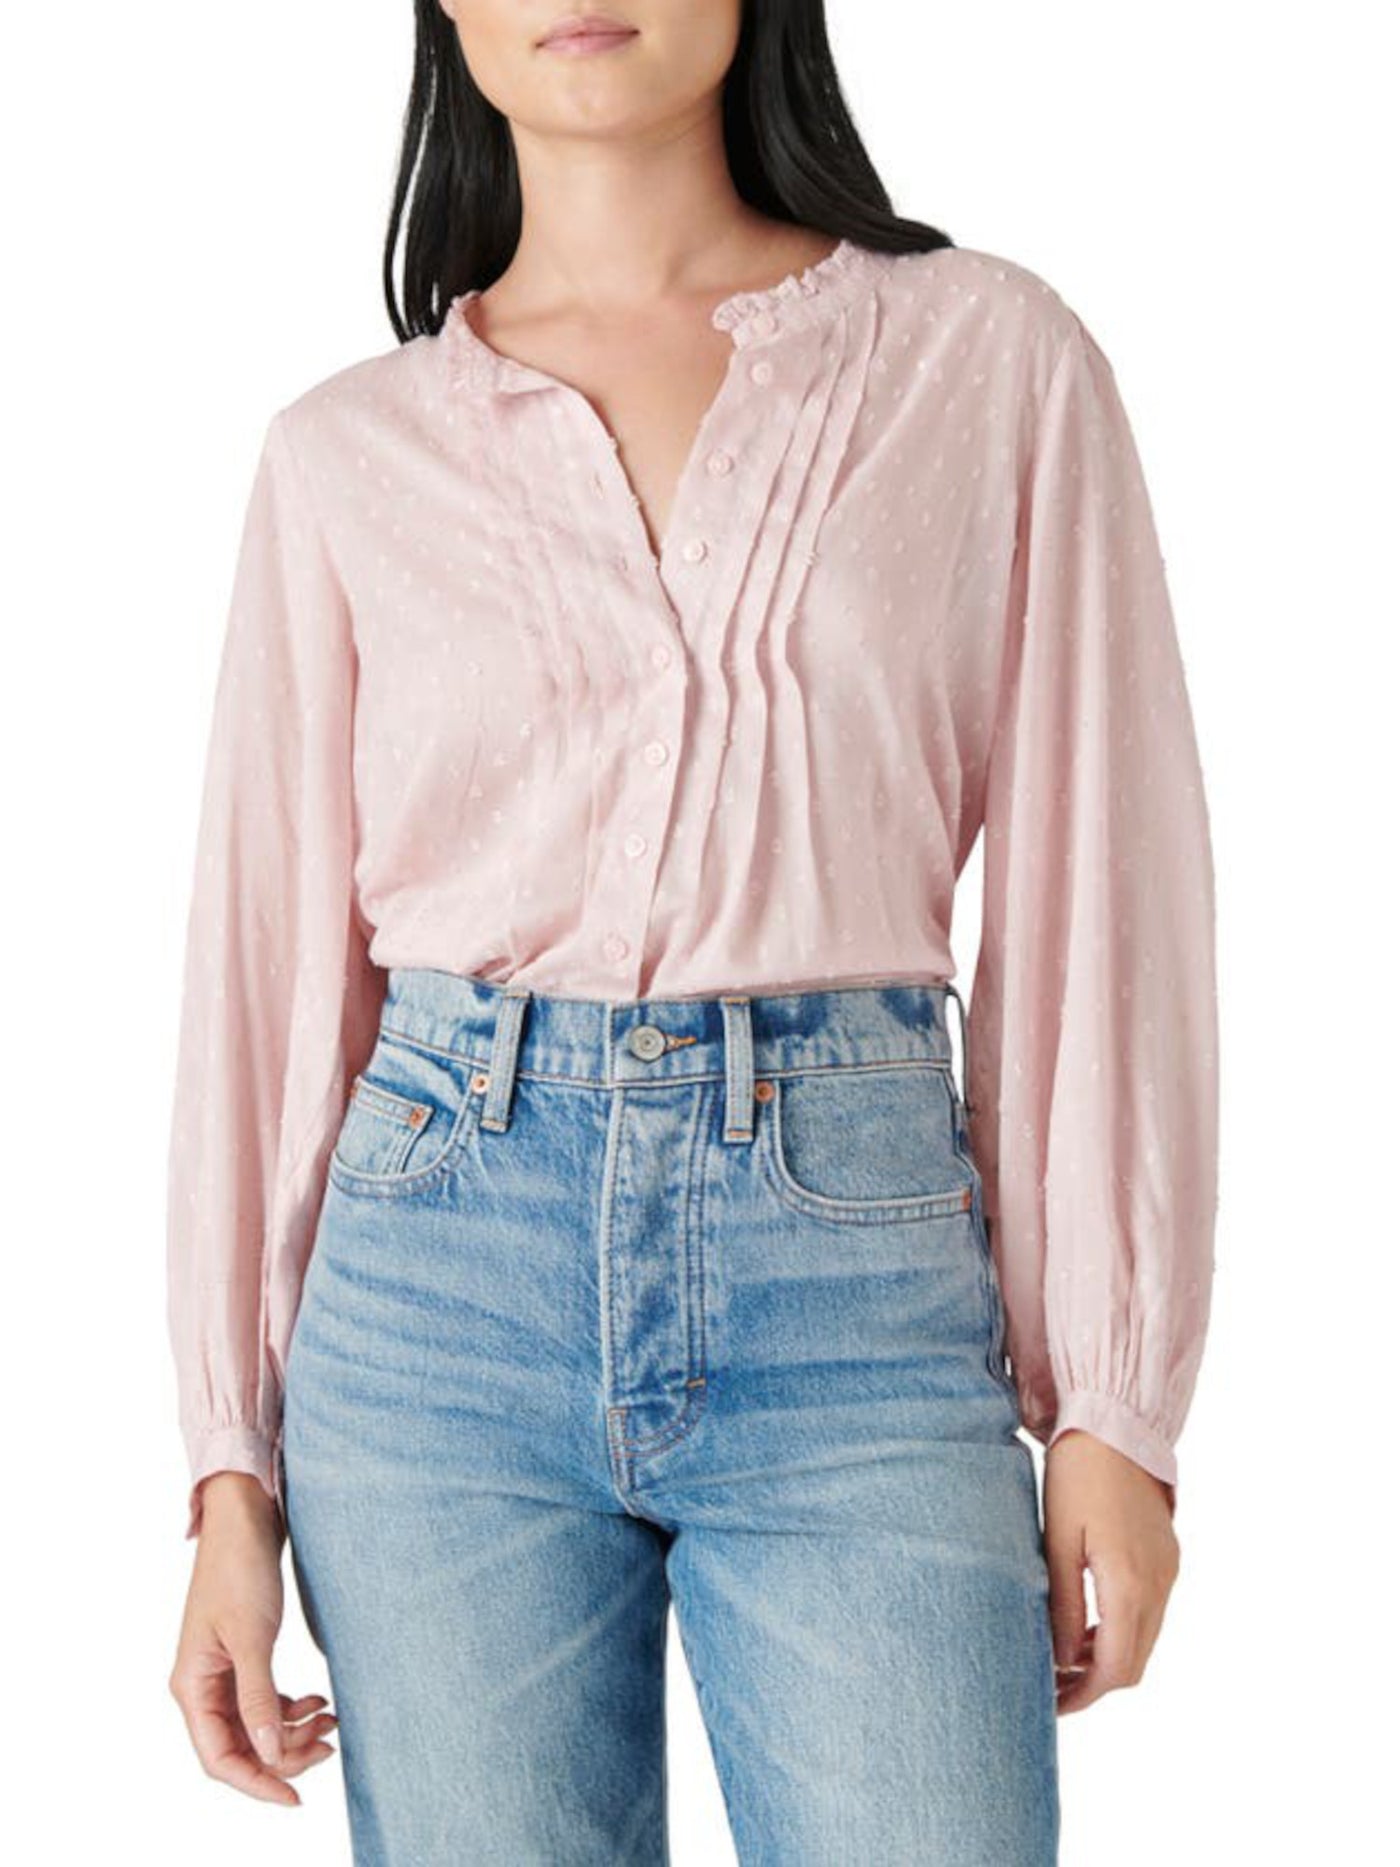 LUCKY BRAND Womens Pink Ruffled Sheer Pintucked Cuffed Sleeve Round Neck Button Up Top S